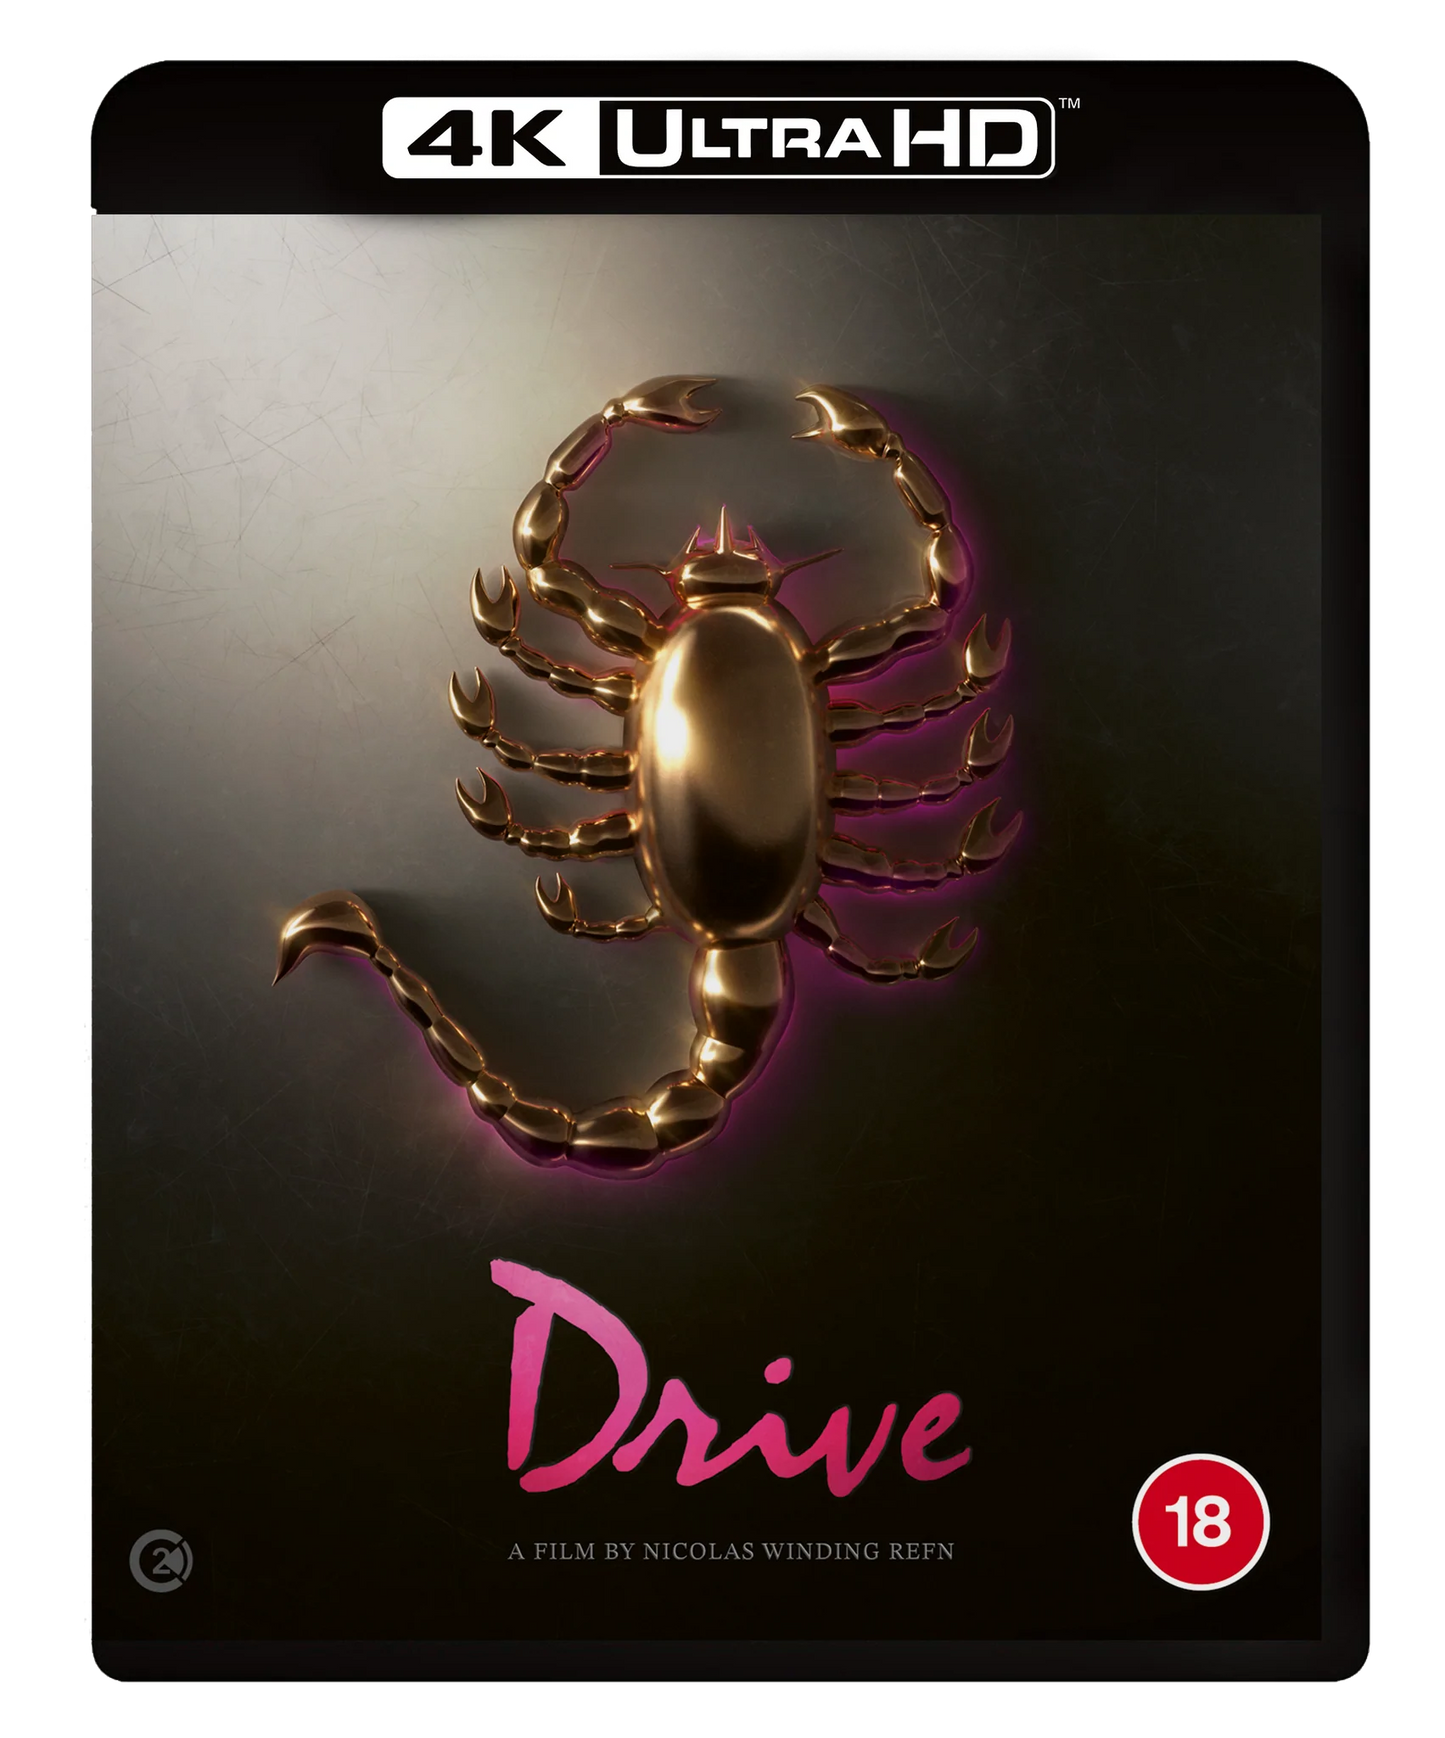 Second Sight on X: DRIVE 4K UHD / Blu-ray Limited Edition sample arrives  at the office! 😊 Released June 6th together with Standard Editions of each  format   / X